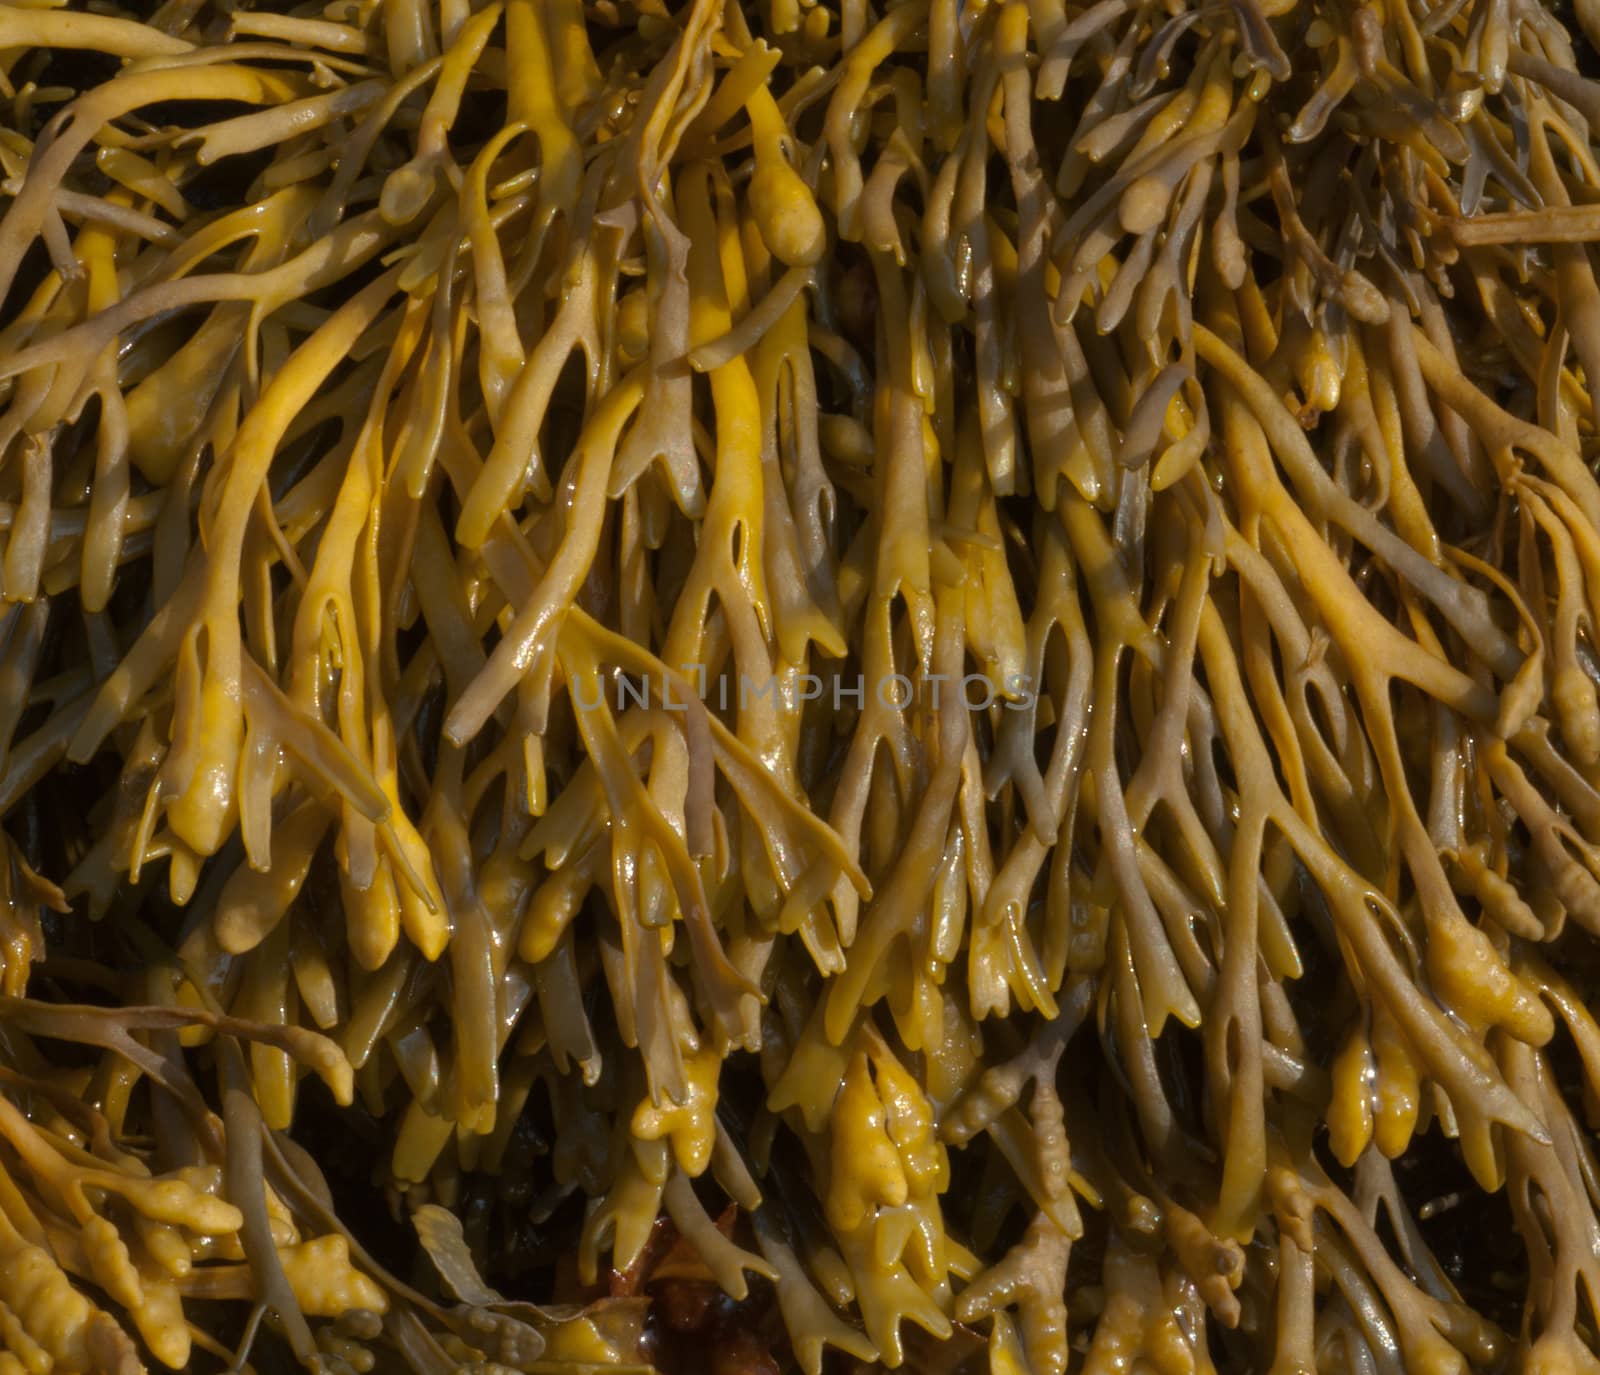 Channel Wrack Seaweed (Pelvetia canaliculata) Brown algae photographed on West coast of Scotland